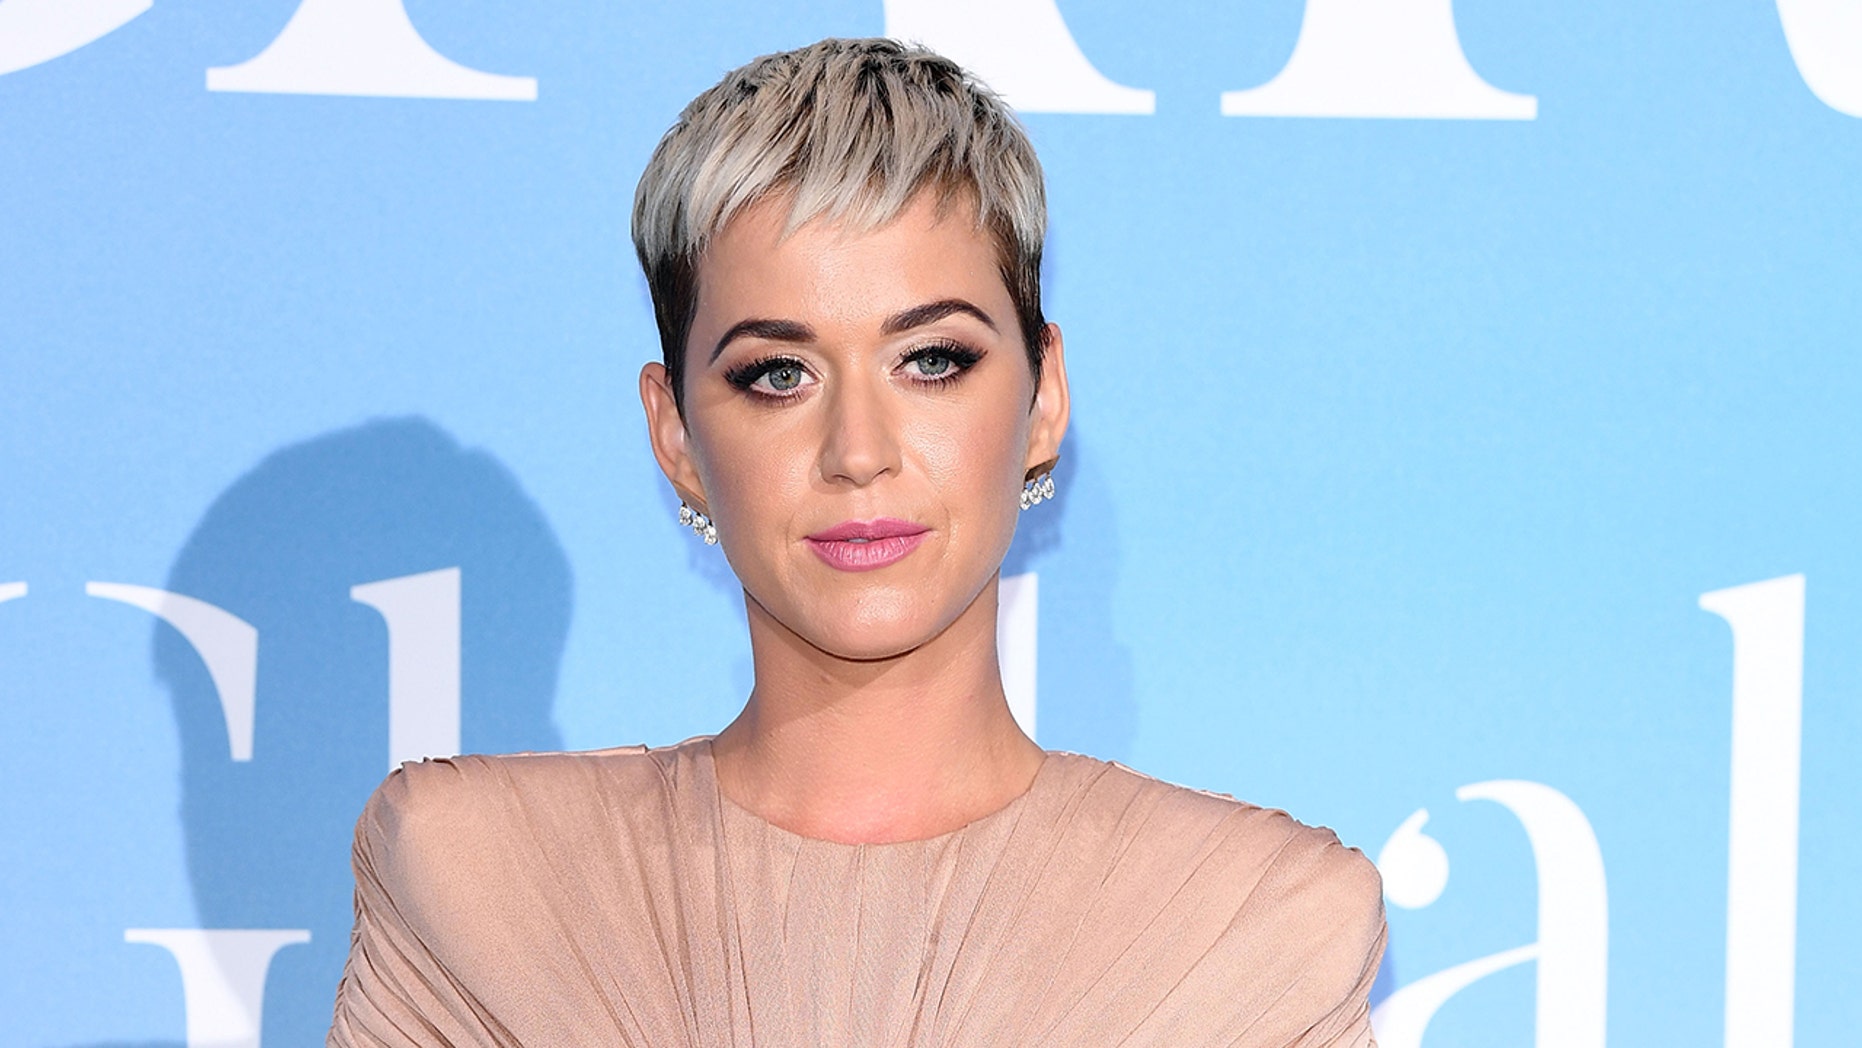 Katy Perry reveals she was suspended from 6th grade for 